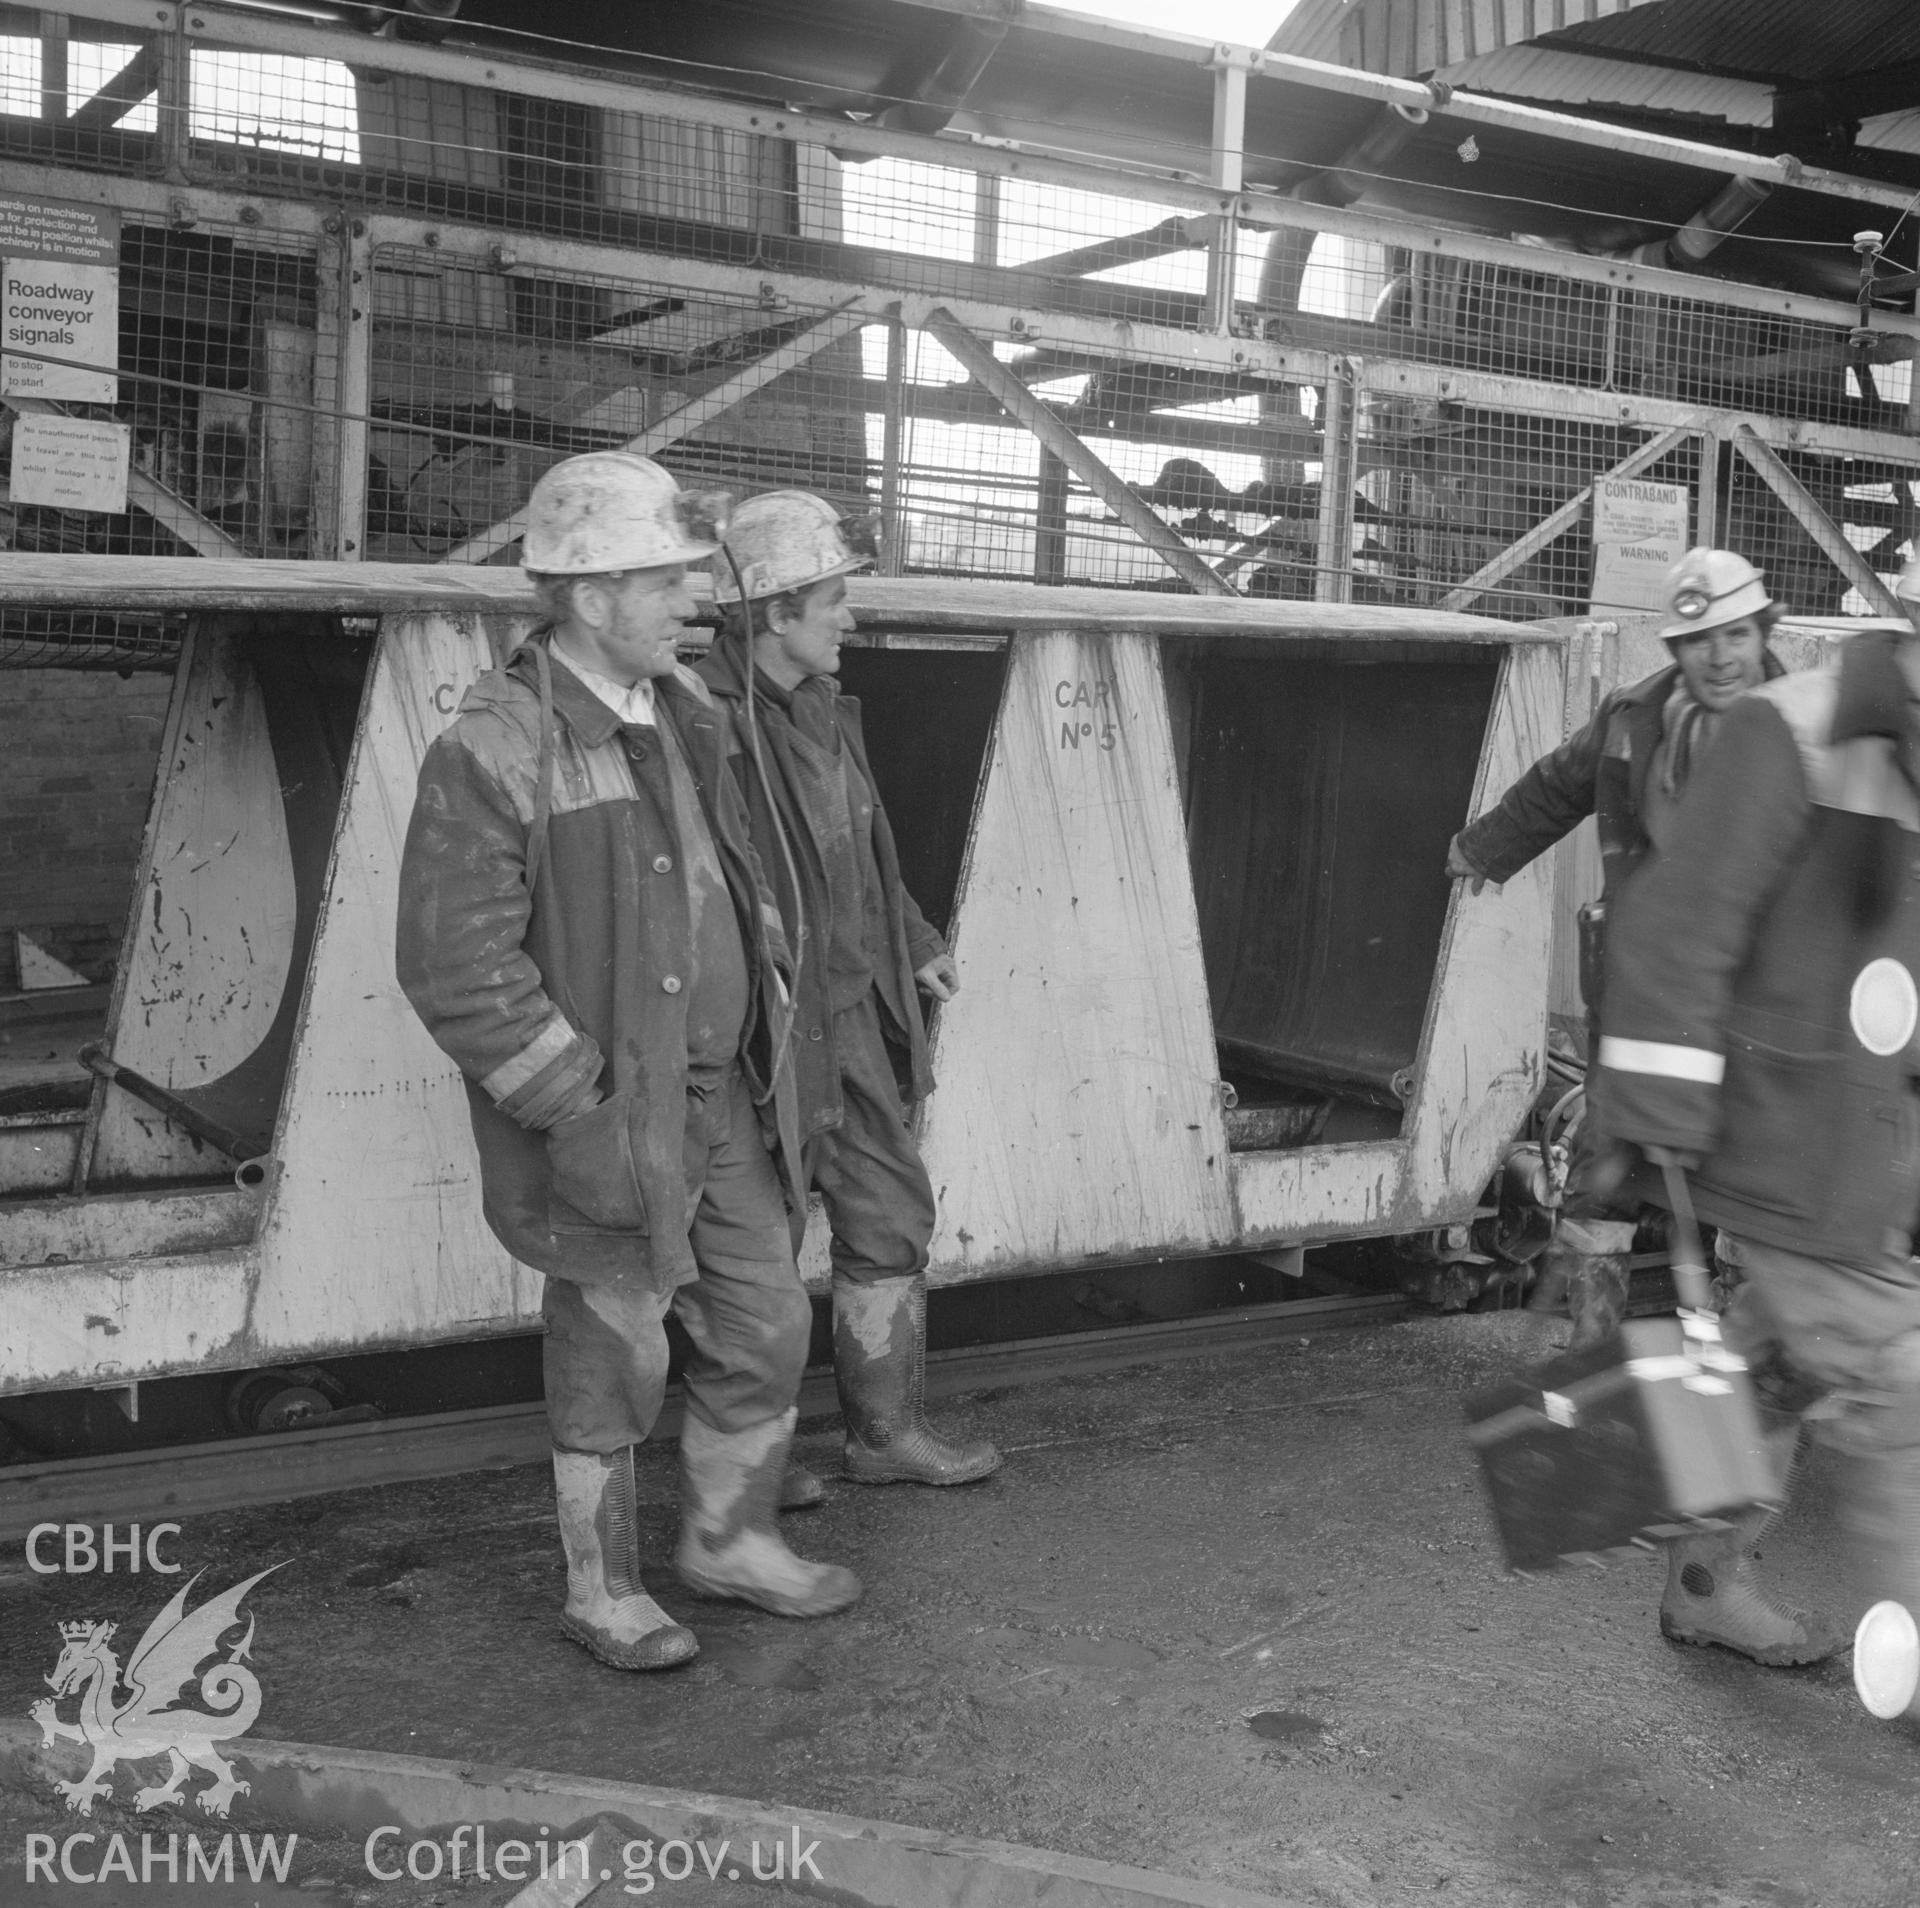 Digital copy of an acetate negative showing men boarding man-rider at Blaenant Colliery, from the John Cornwell Collection.